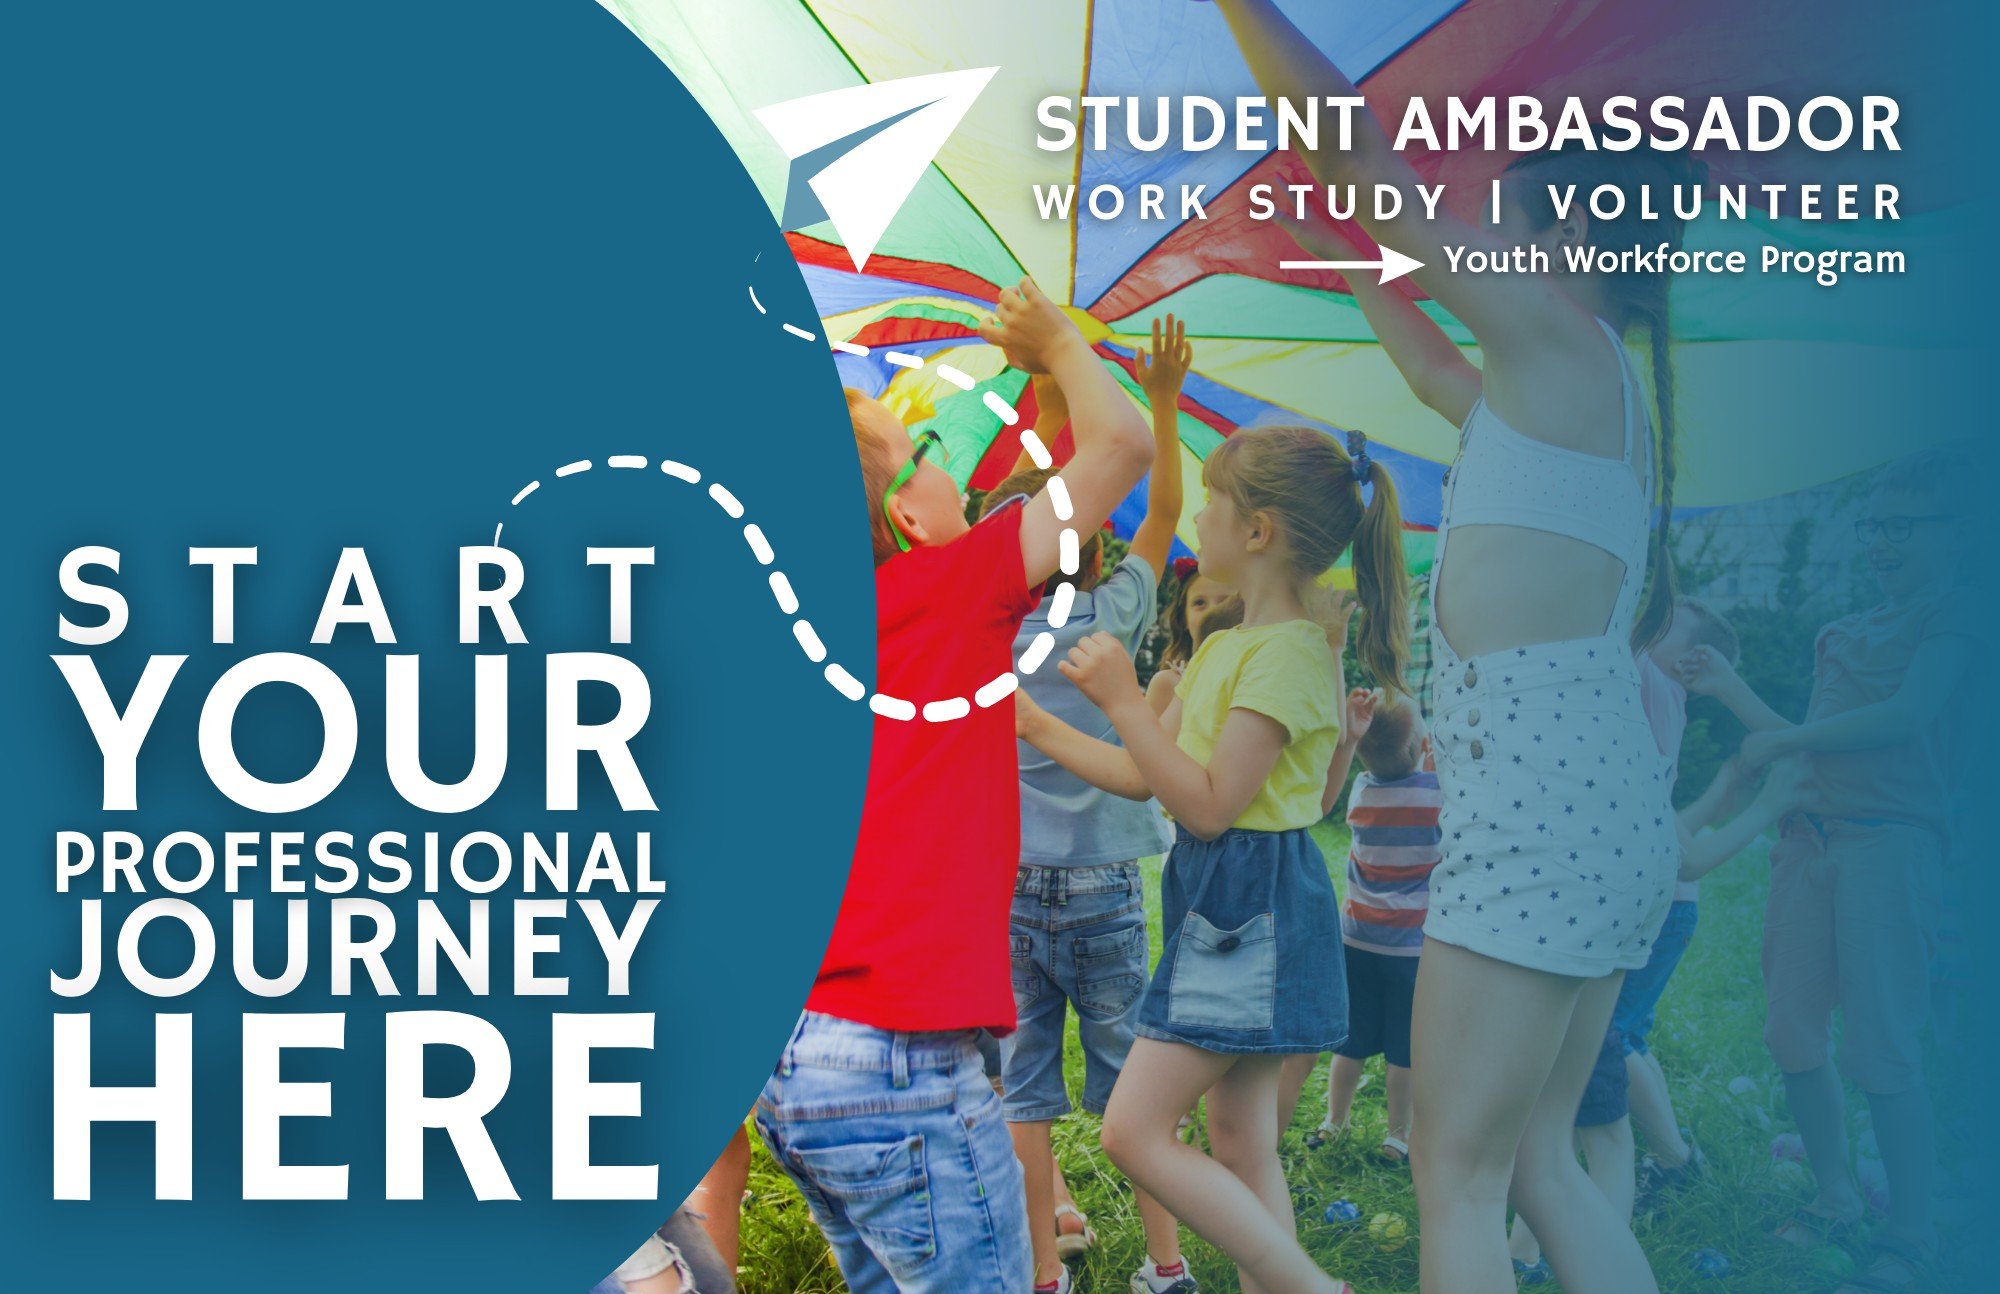 📌Become a -&gt;Student Ambassador&lt;- in the River Arts Youth Workforce Program.

This is a work study/ volunteer role that lets you earn FREE art classes, series, and camp in exchange for your volunteer hours!

The purpose of the Summer Camp Class